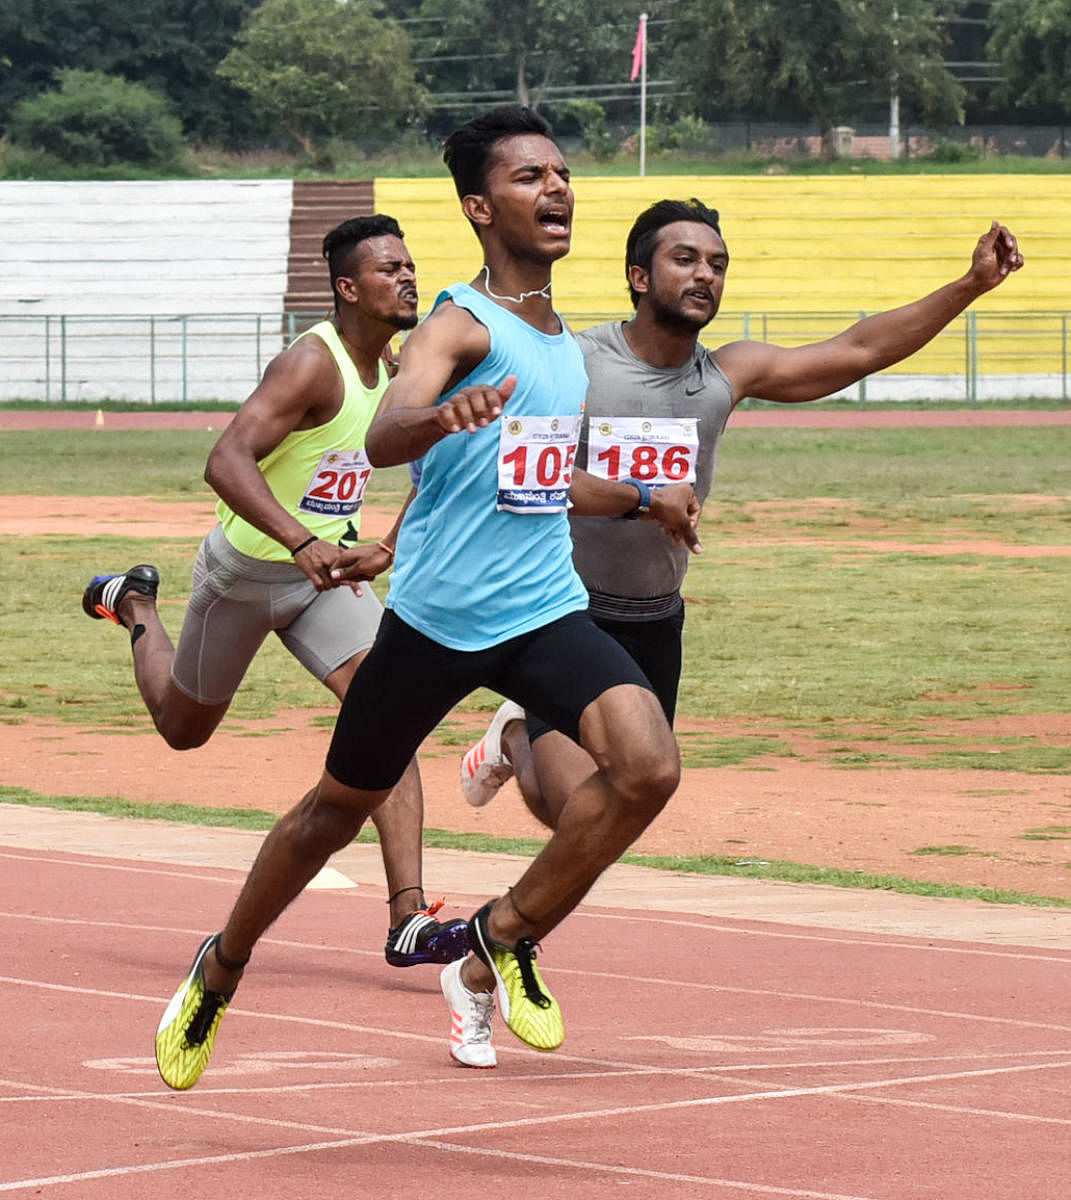 Bengaluru's Shashikanth (left) en route to victory in the 100m race at the Dasara Games athletics event in Mysuru on Tuesday. DH PHOTO/ Savitha BR